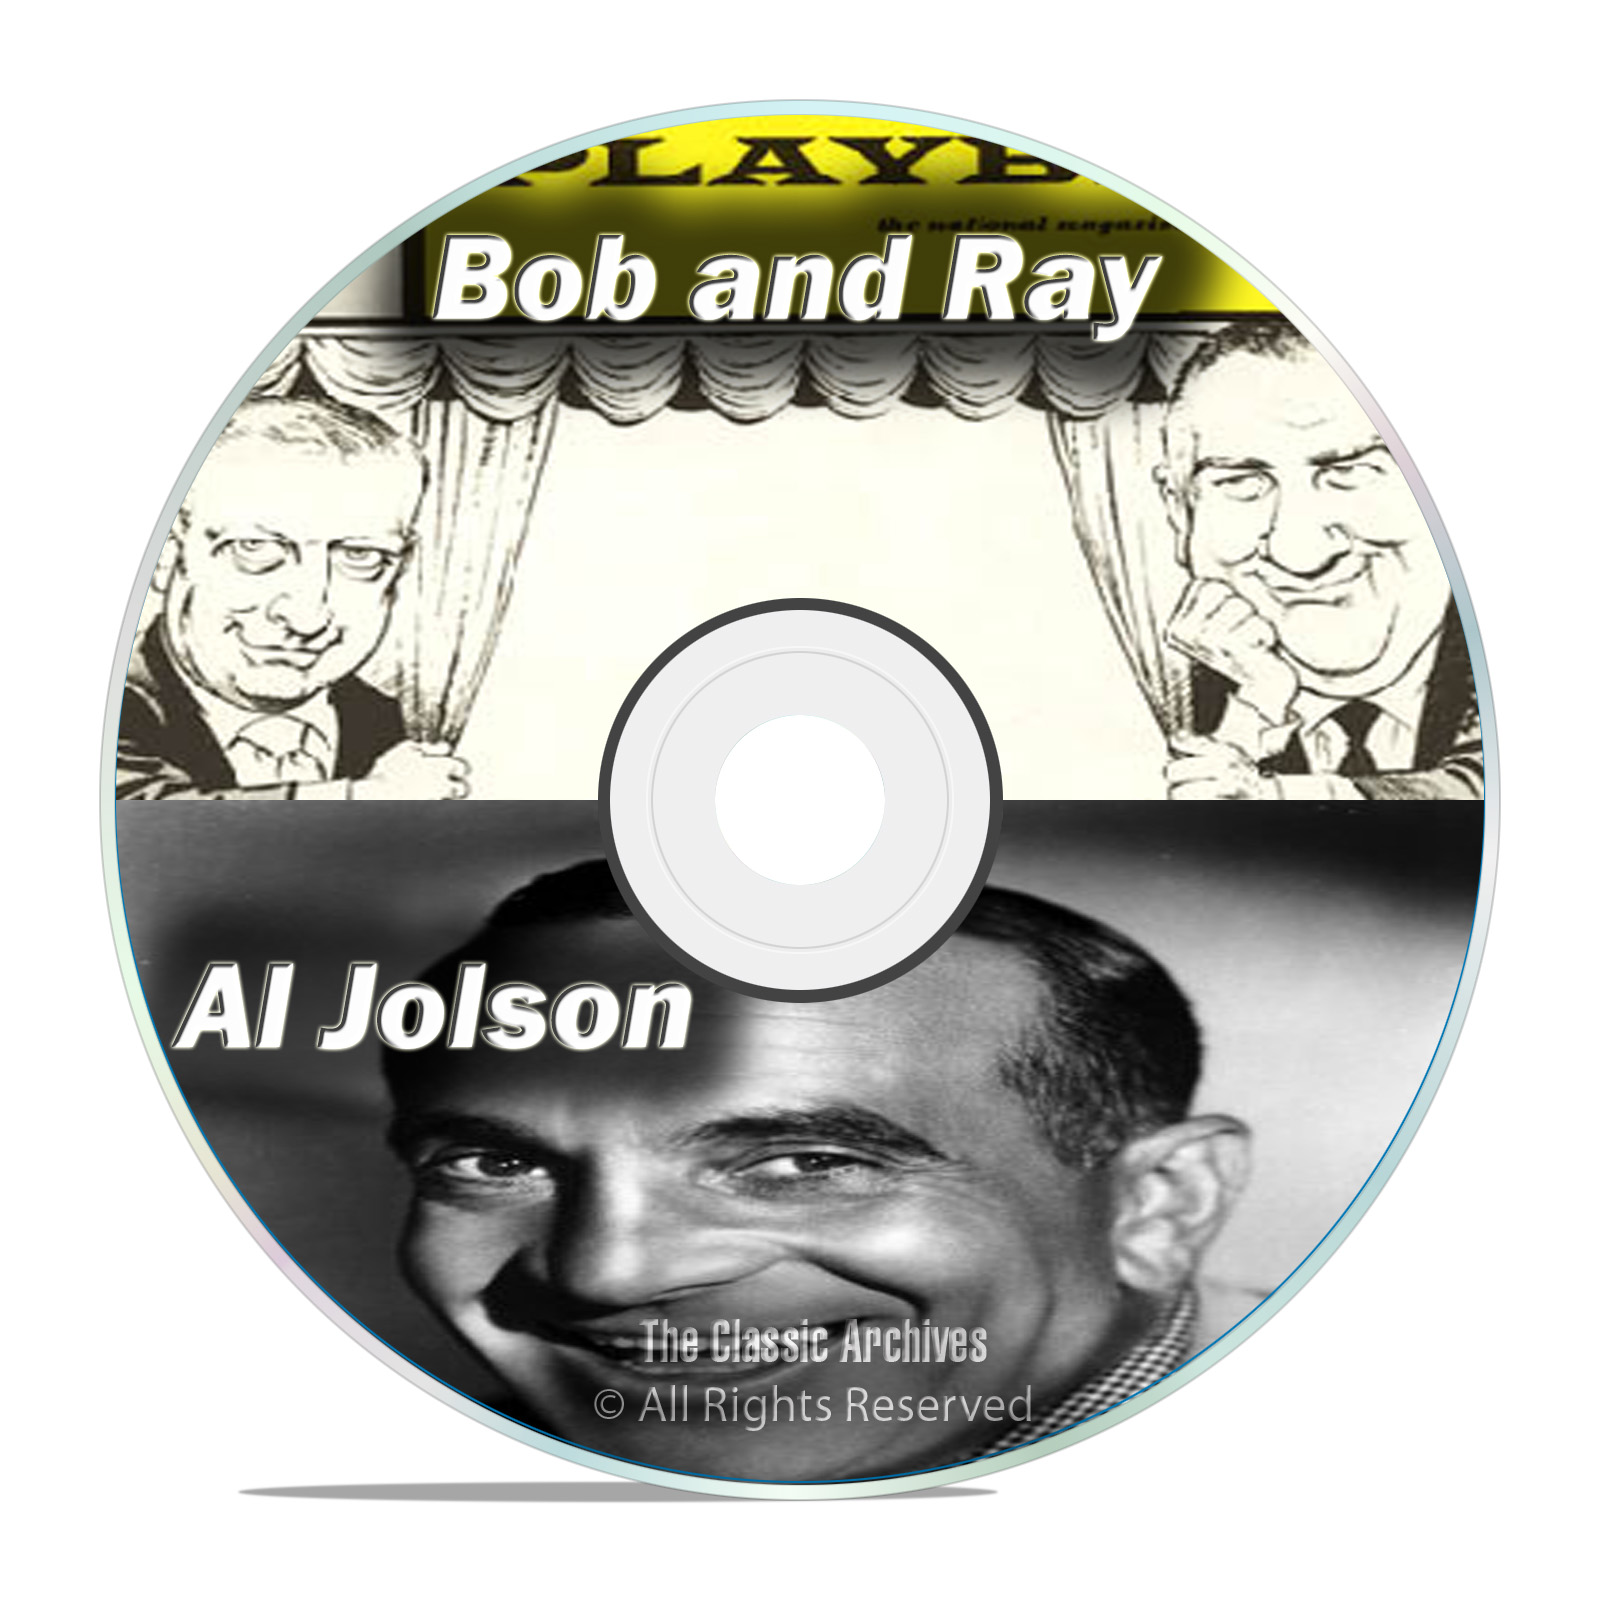 Bob and Ray Show, Al Jolson, All Known 1,207 Old Time Radio Shows MP3 DVD